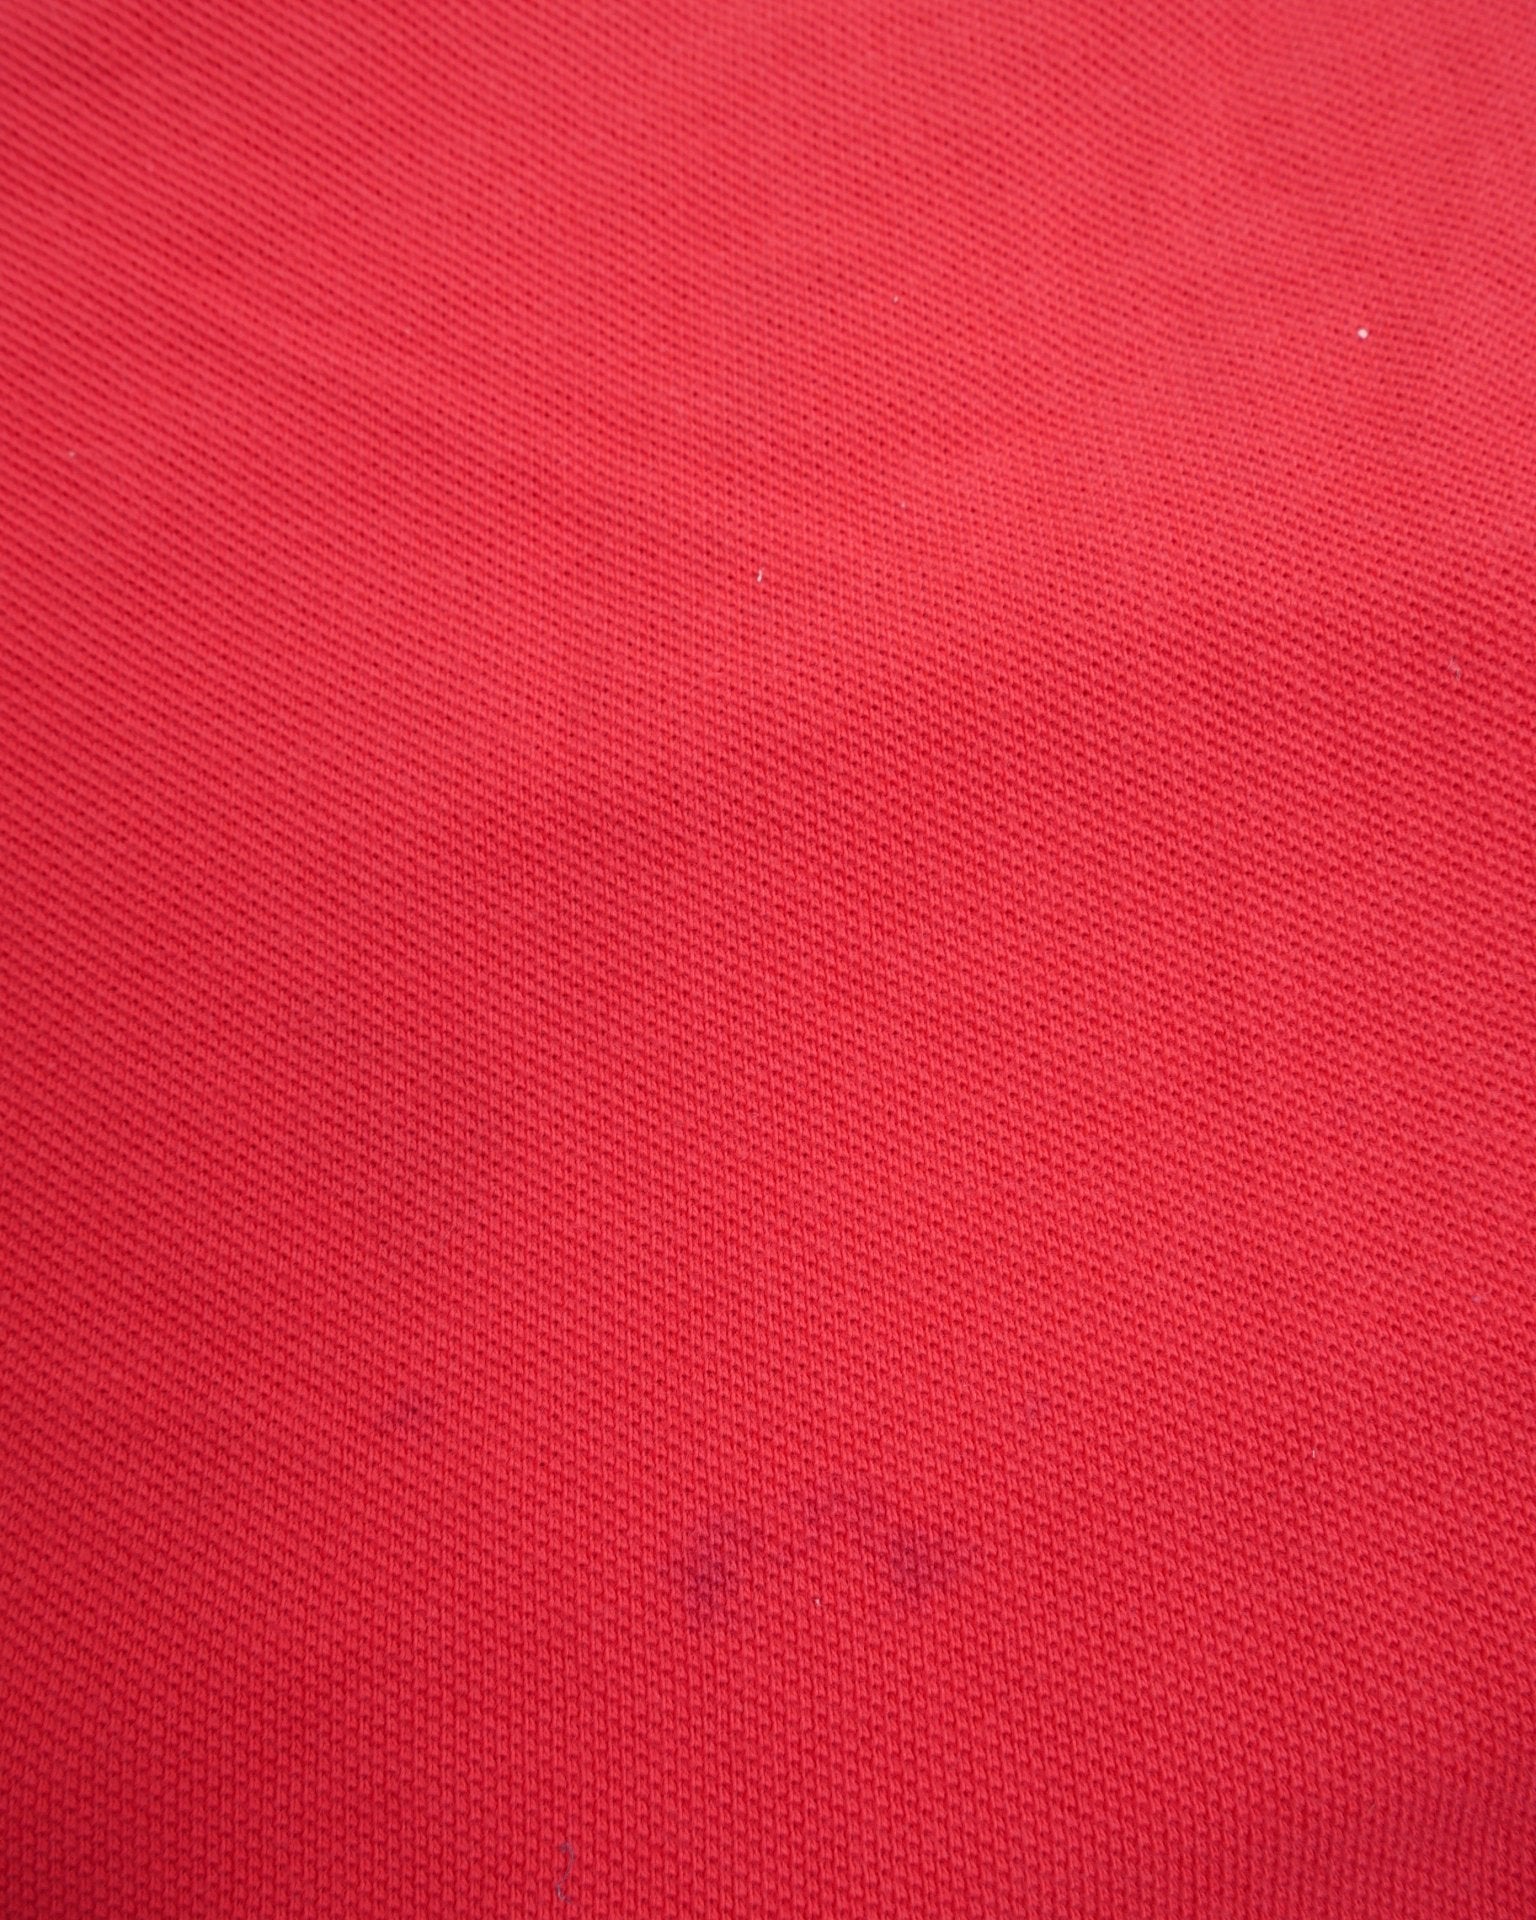 lacoste embroidered Logo red Polo Shirt - Peeces